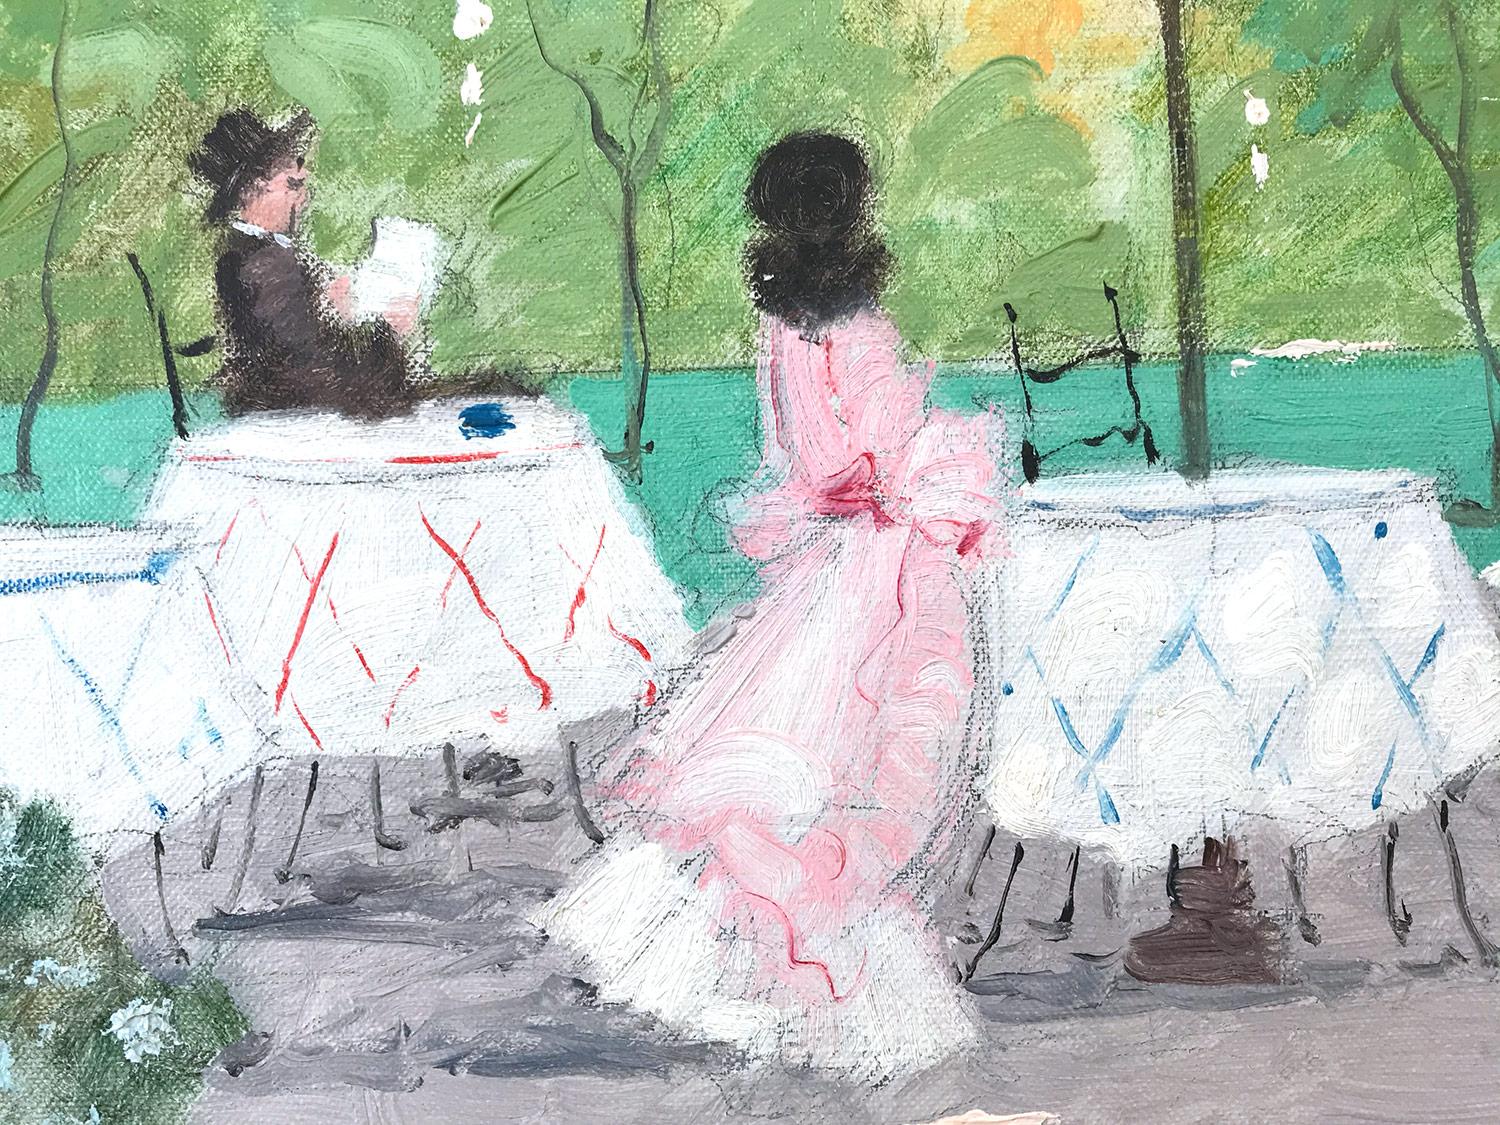 cafe scene painting